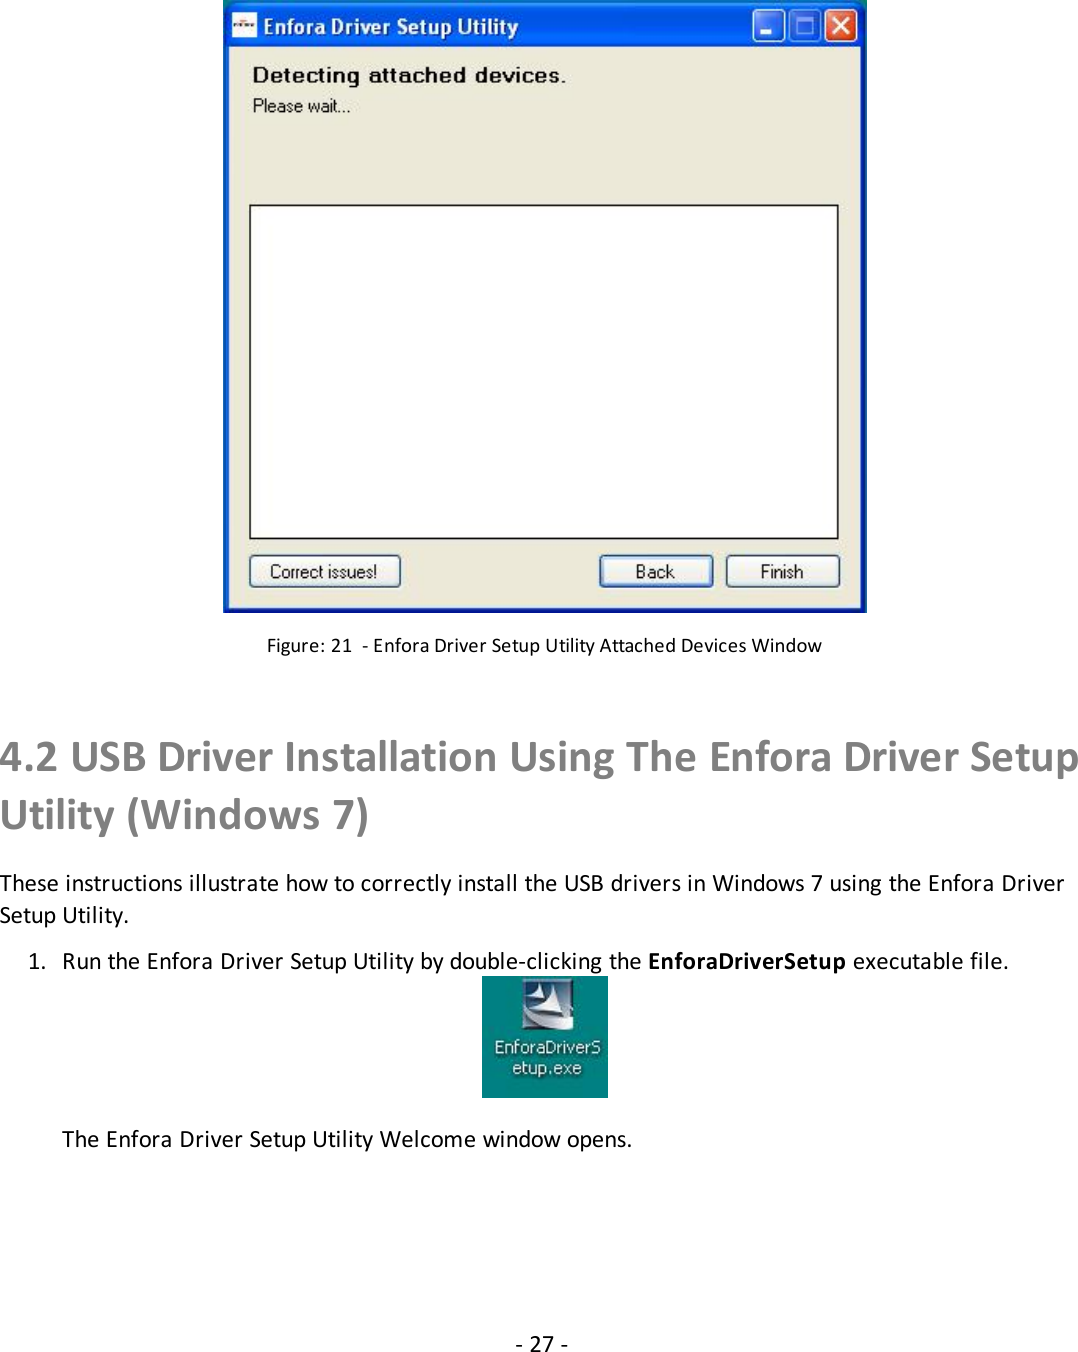 - 27 -Figure: 21 - Enfora Driver Setup Utility Attached Devices Window4.2 USB Driver Installation Using The Enfora Driver SetupUtility (Windows 7)These instructions illustrate how to correctly install the USB drivers in Windows 7 using the Enfora DriverSetup Utility.1. Run the Enfora Driver Setup Utility by double-clicking the EnforaDriverSetup executable file.The Enfora Driver Setup Utility Welcome window opens.